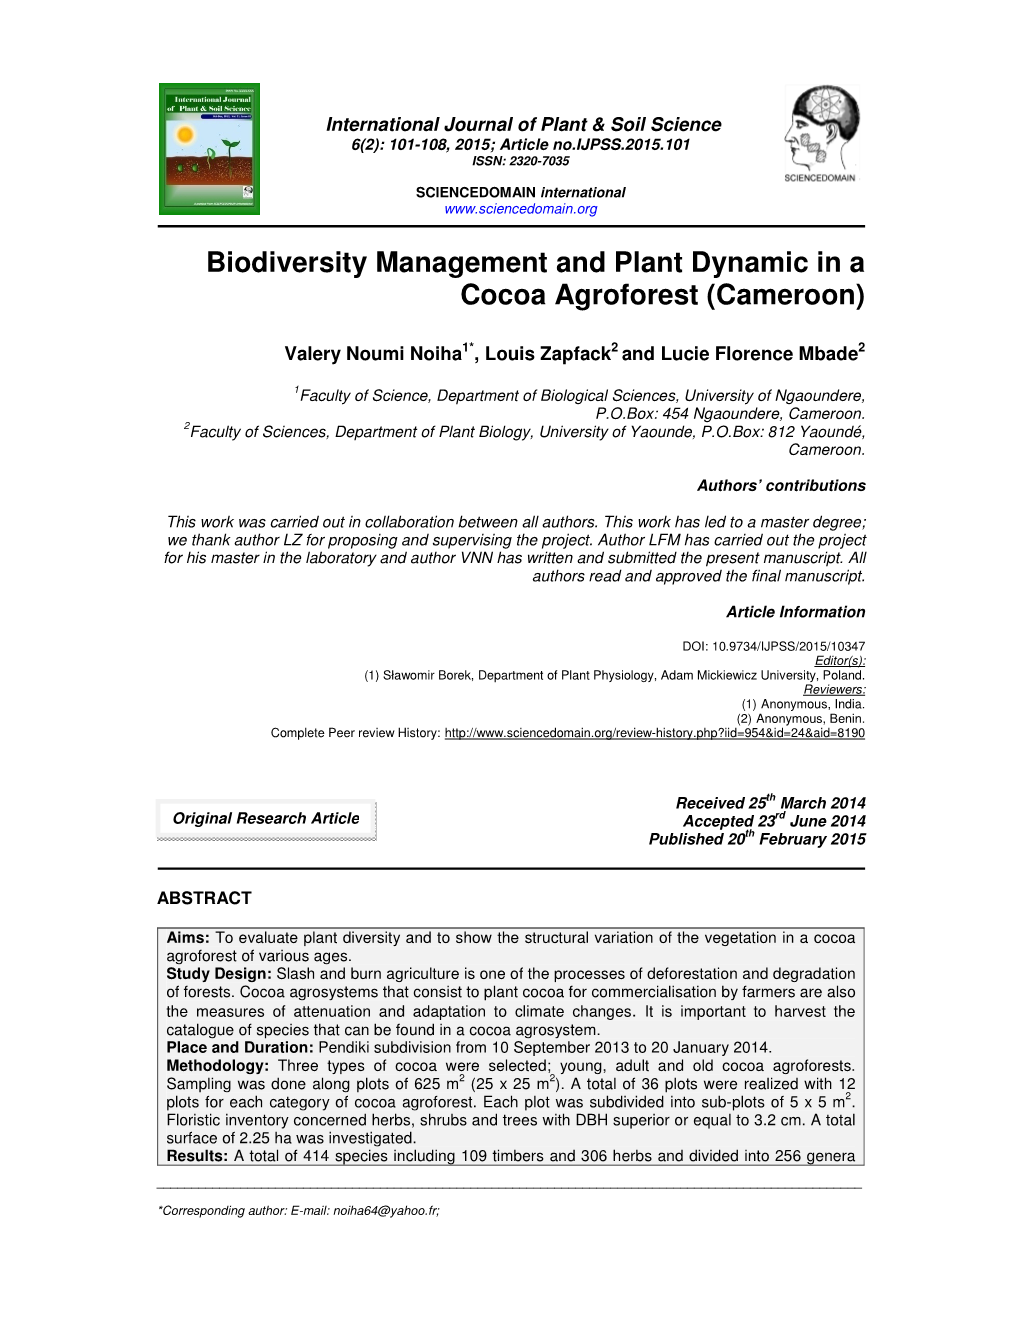 Biodiversity Management and Plant Dynamic in a Cocoa Agroforest (Cameroon)